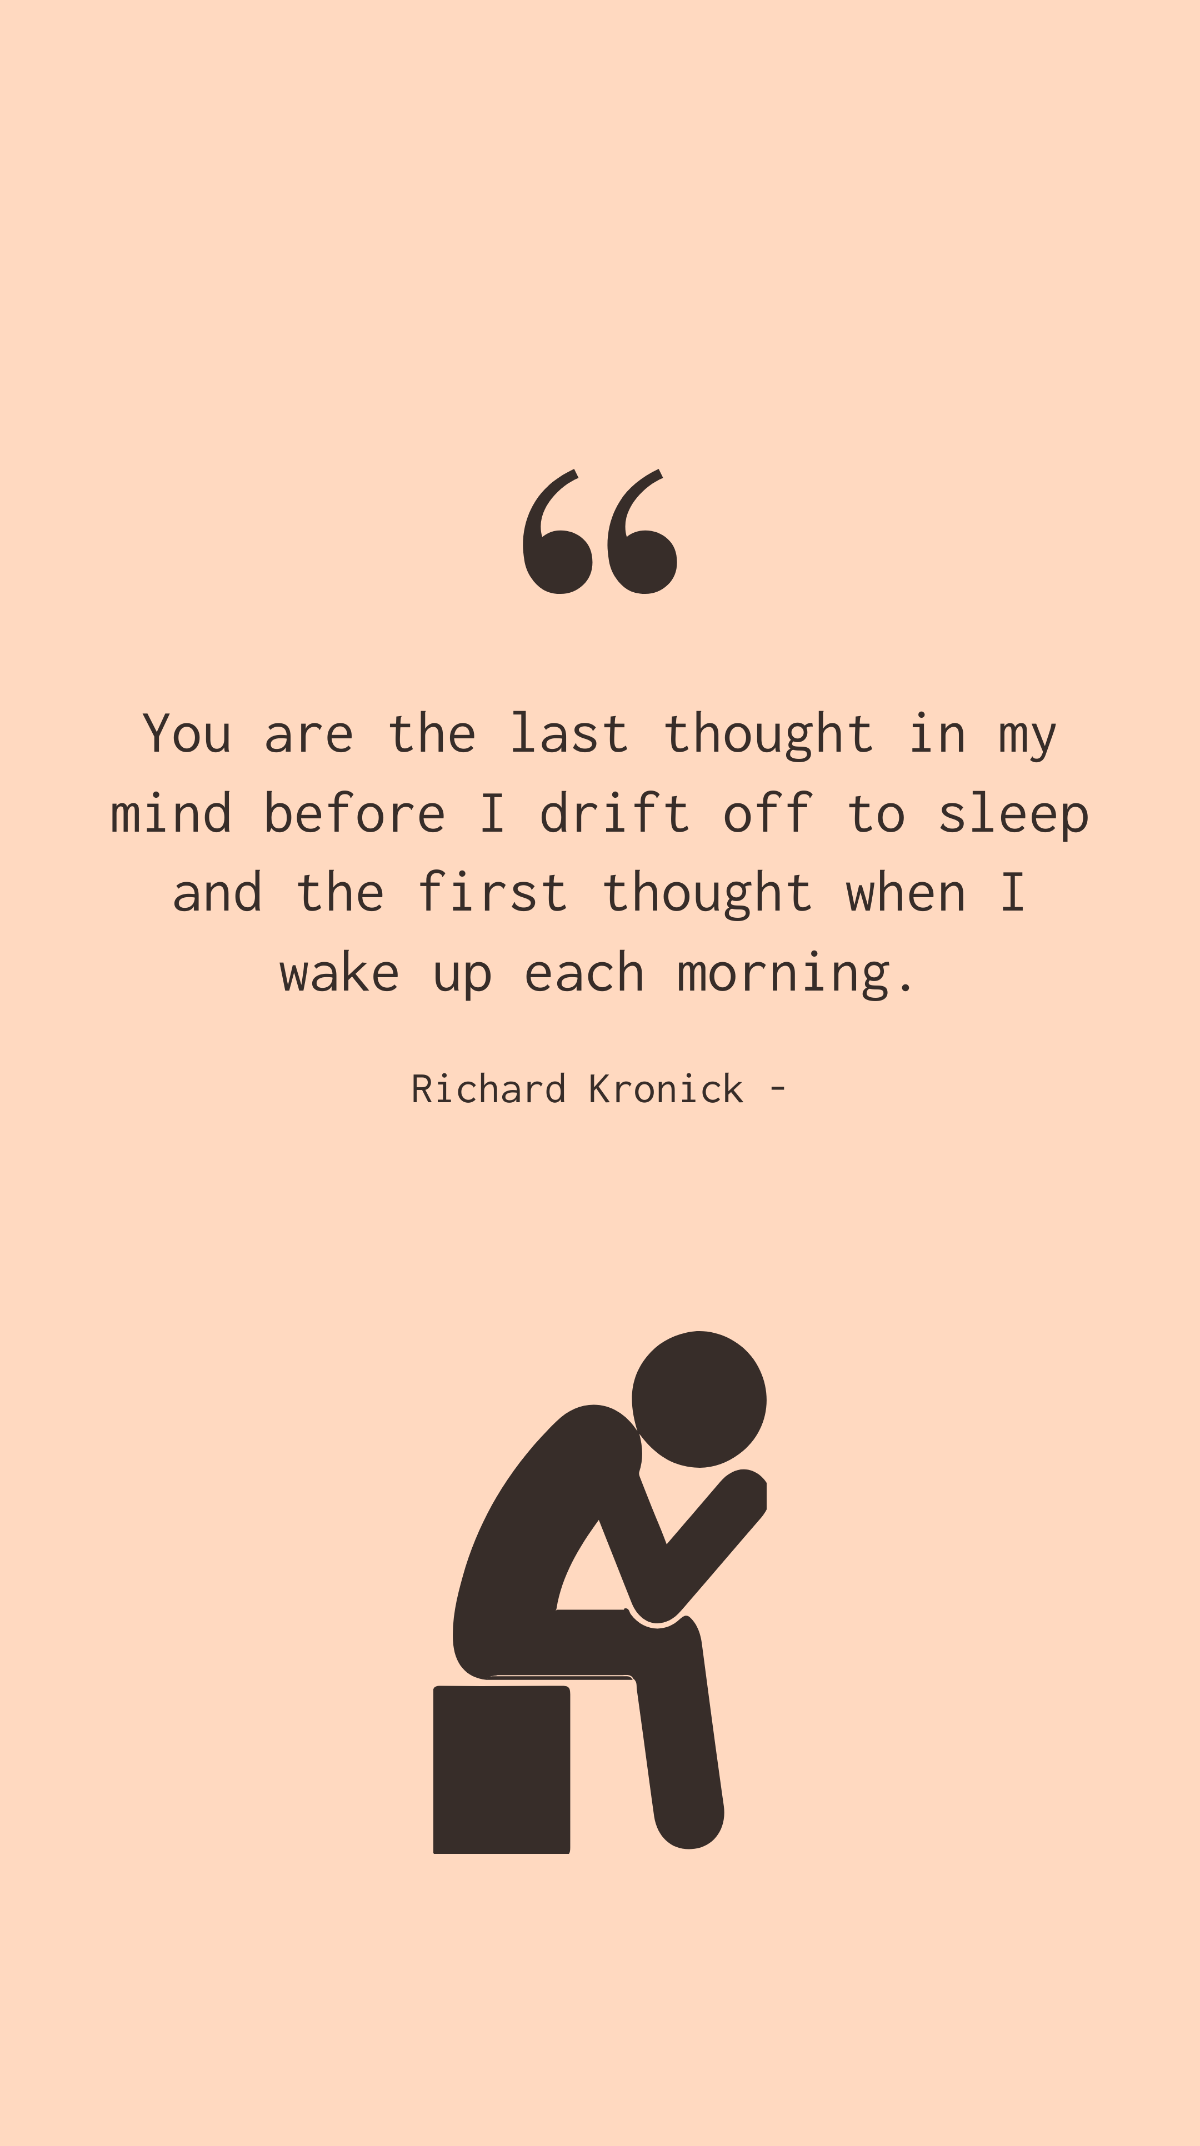 Richard Kronick - You are the last thought in my mind before I drift off to sleep and the first thought when I wake up each morning. Template